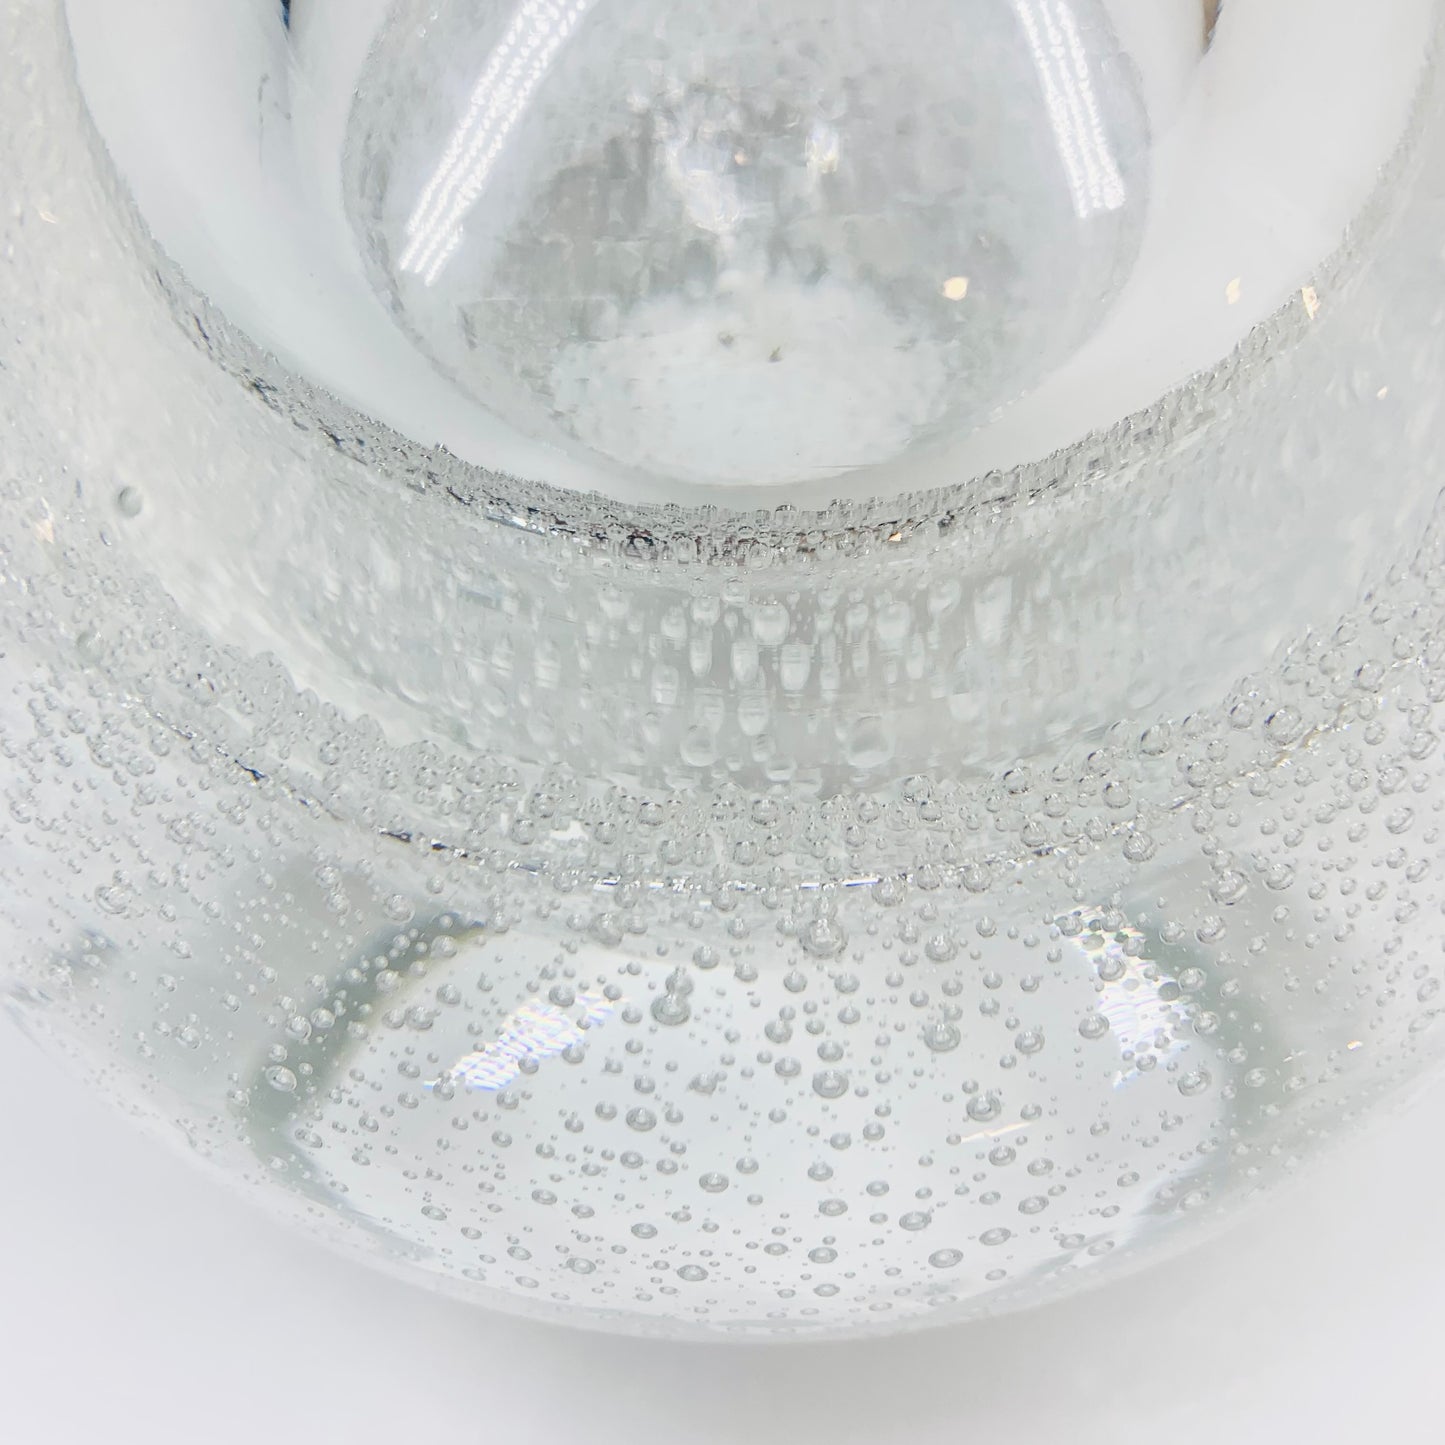 Polish glass orb with controlled bubbles